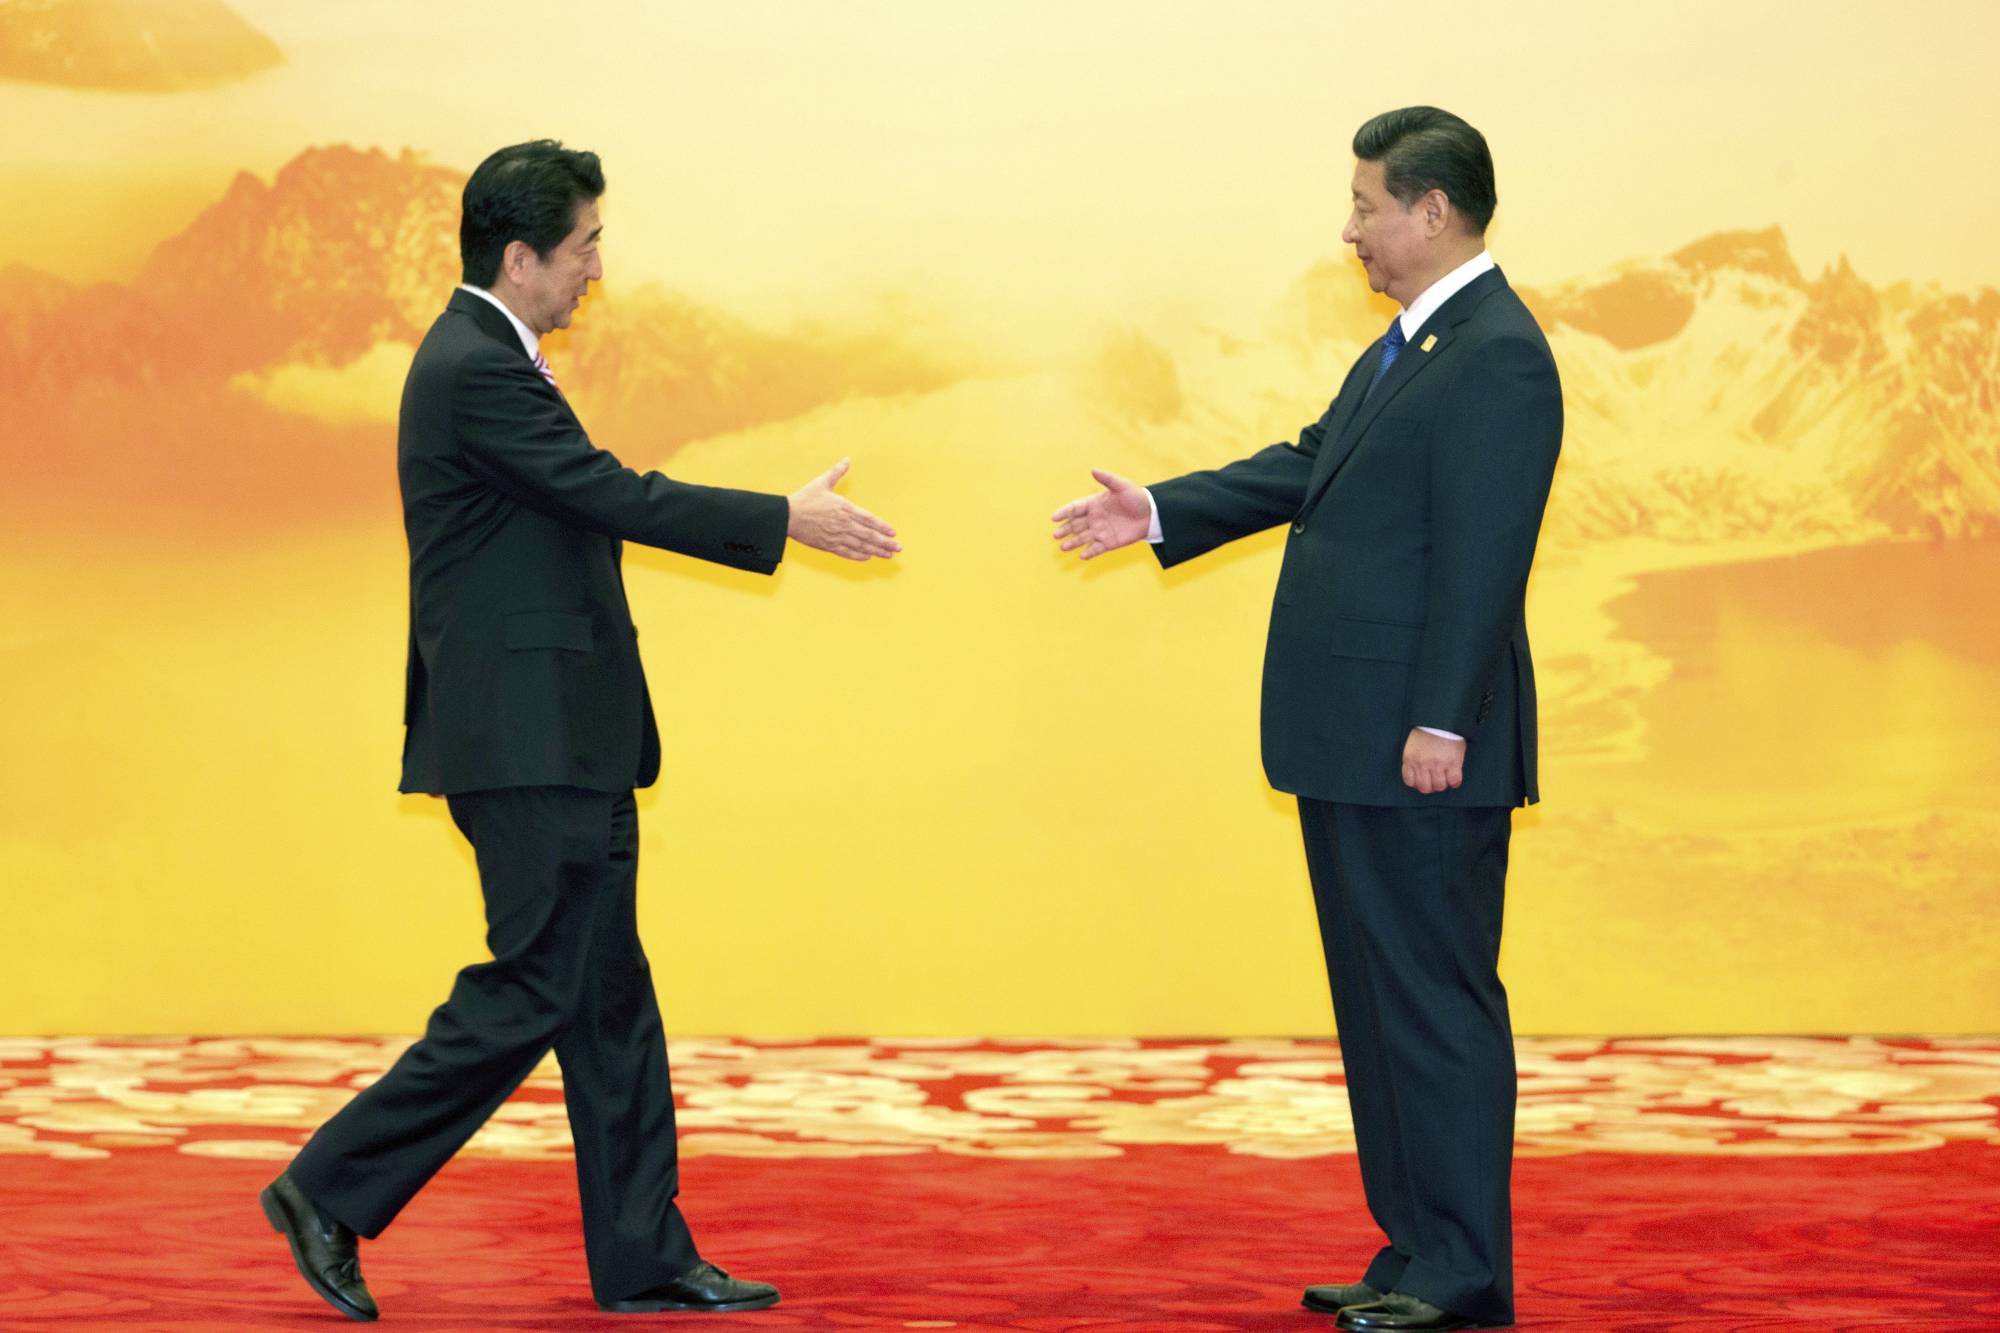 Prime Minister Shinzo Abe greets Chinese President Xi Jinping during an Asia-Pacific Economic Cooperation meeting in Beijing in November 2014. | AP